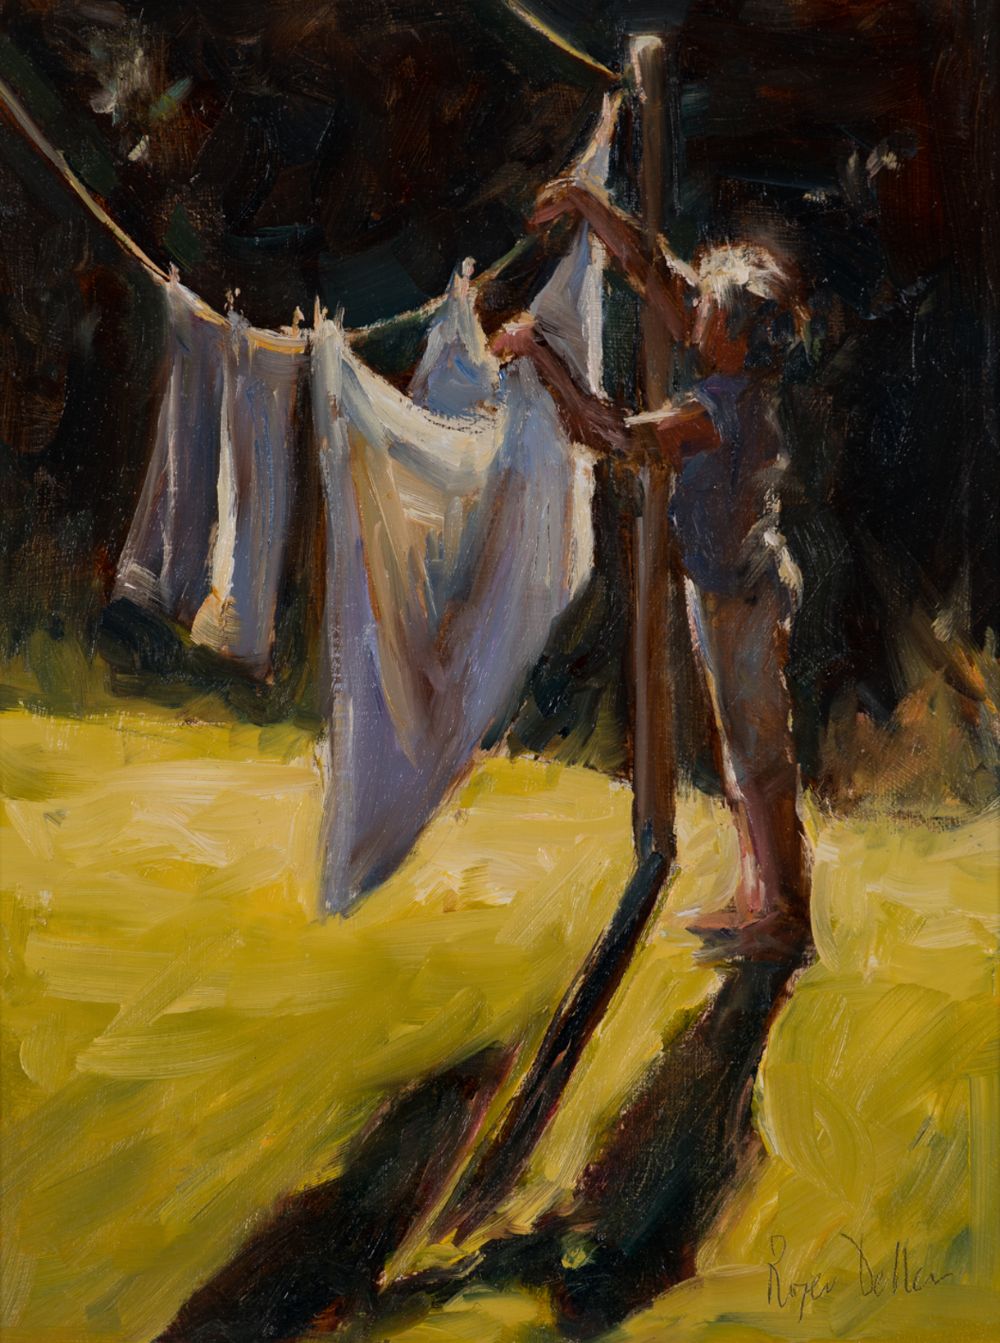 Lot 66 - THE WASHING LINE by Roger Dellar ROI